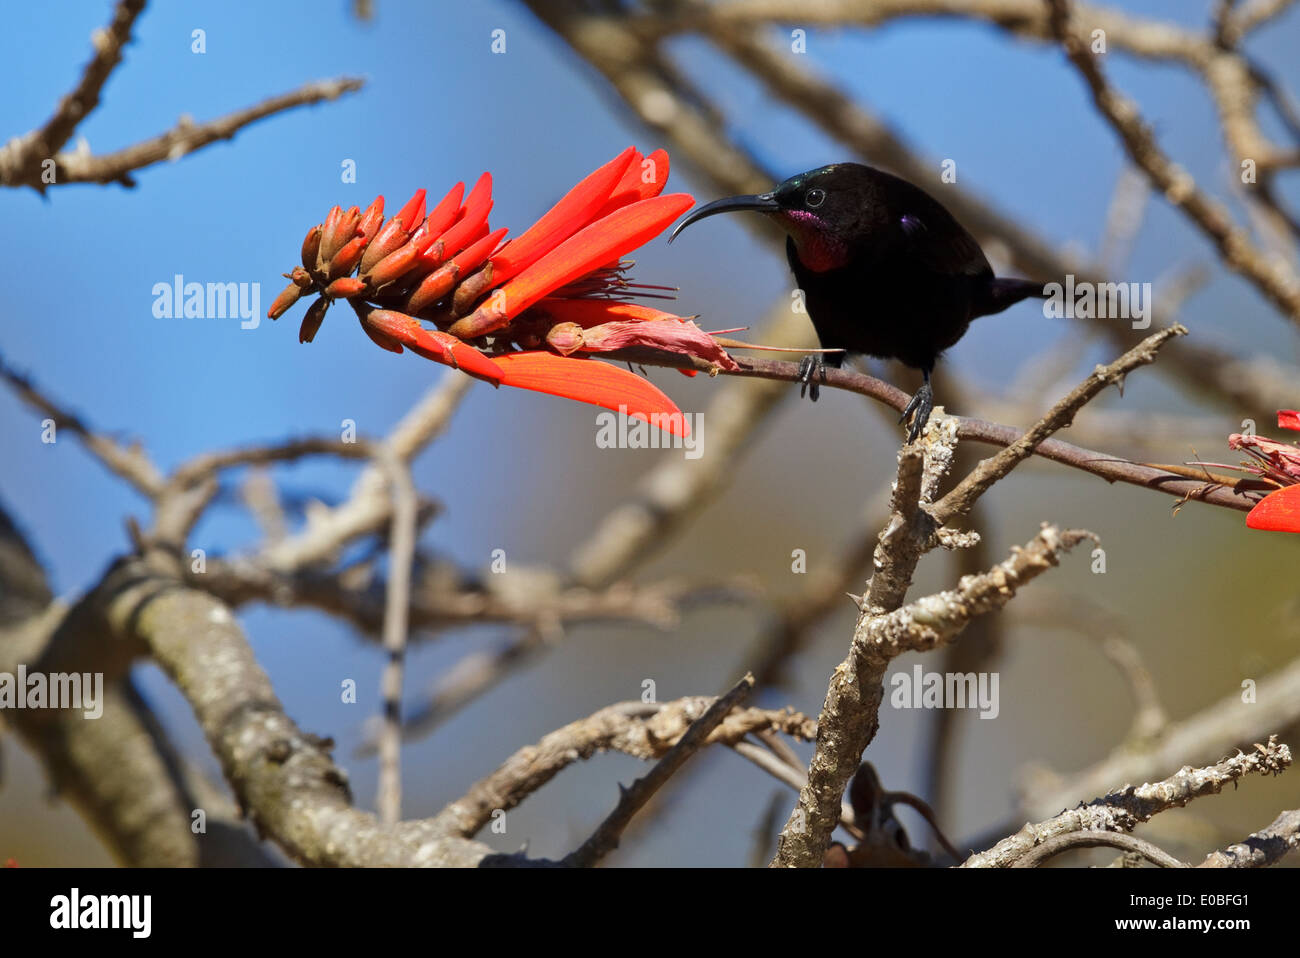 Amethyst Sunbird (Chalcomitra amethystina), searching for nectar in Common Coral Tree Stock Photo